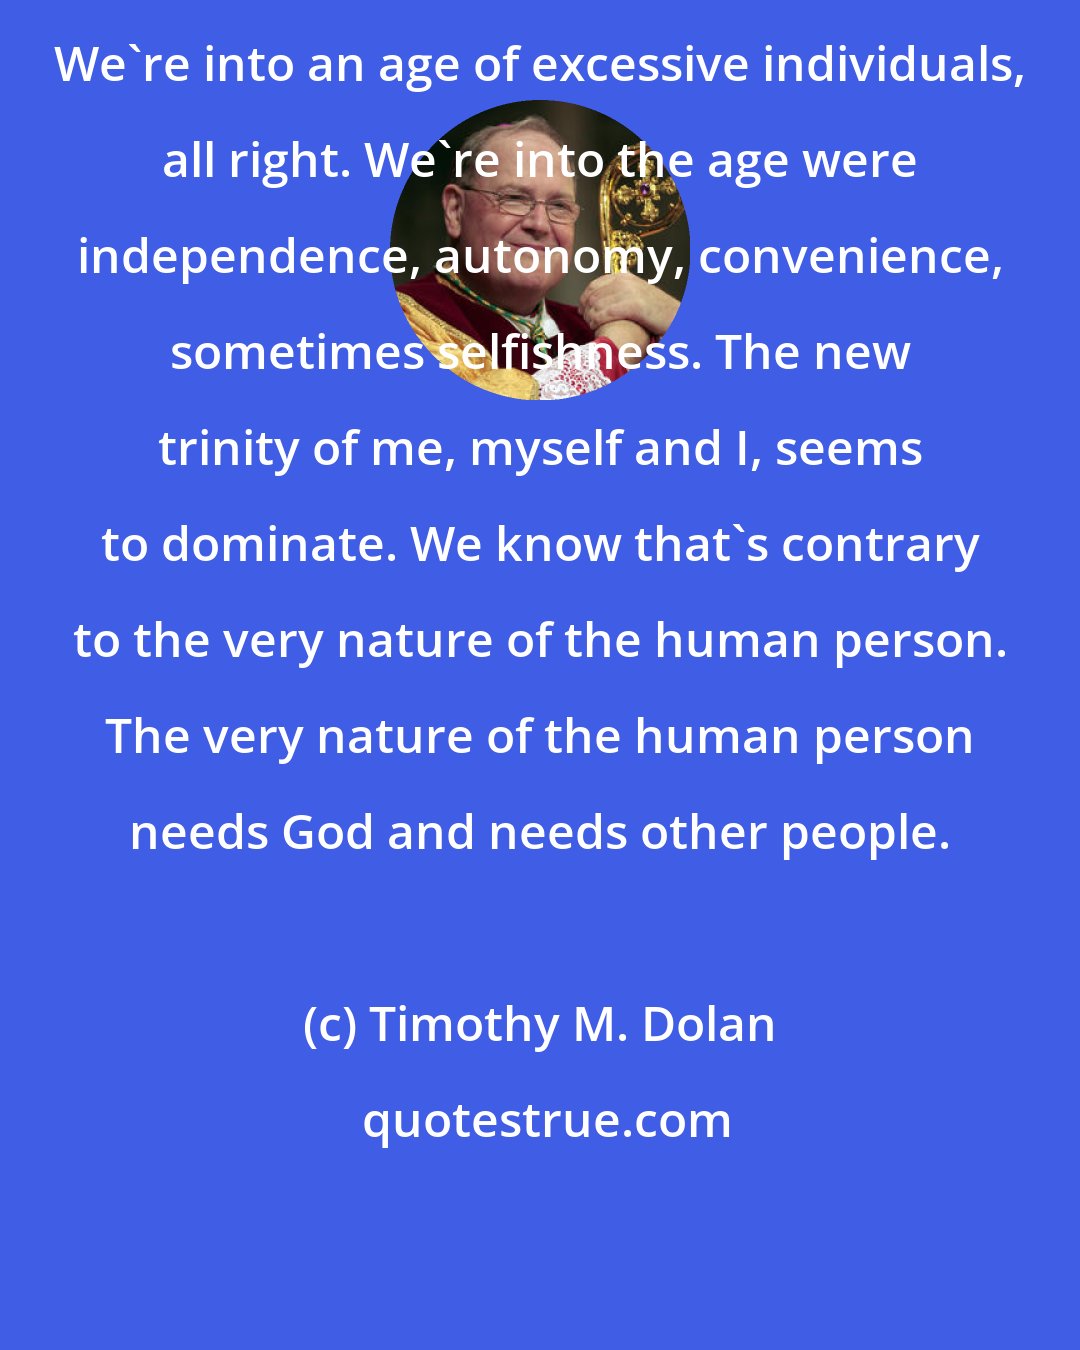 Timothy M. Dolan: We're into an age of excessive individuals, all right. We're into the age were independence, autonomy, convenience, sometimes selfishness. The new trinity of me, myself and I, seems to dominate. We know that's contrary to the very nature of the human person. The very nature of the human person needs God and needs other people.